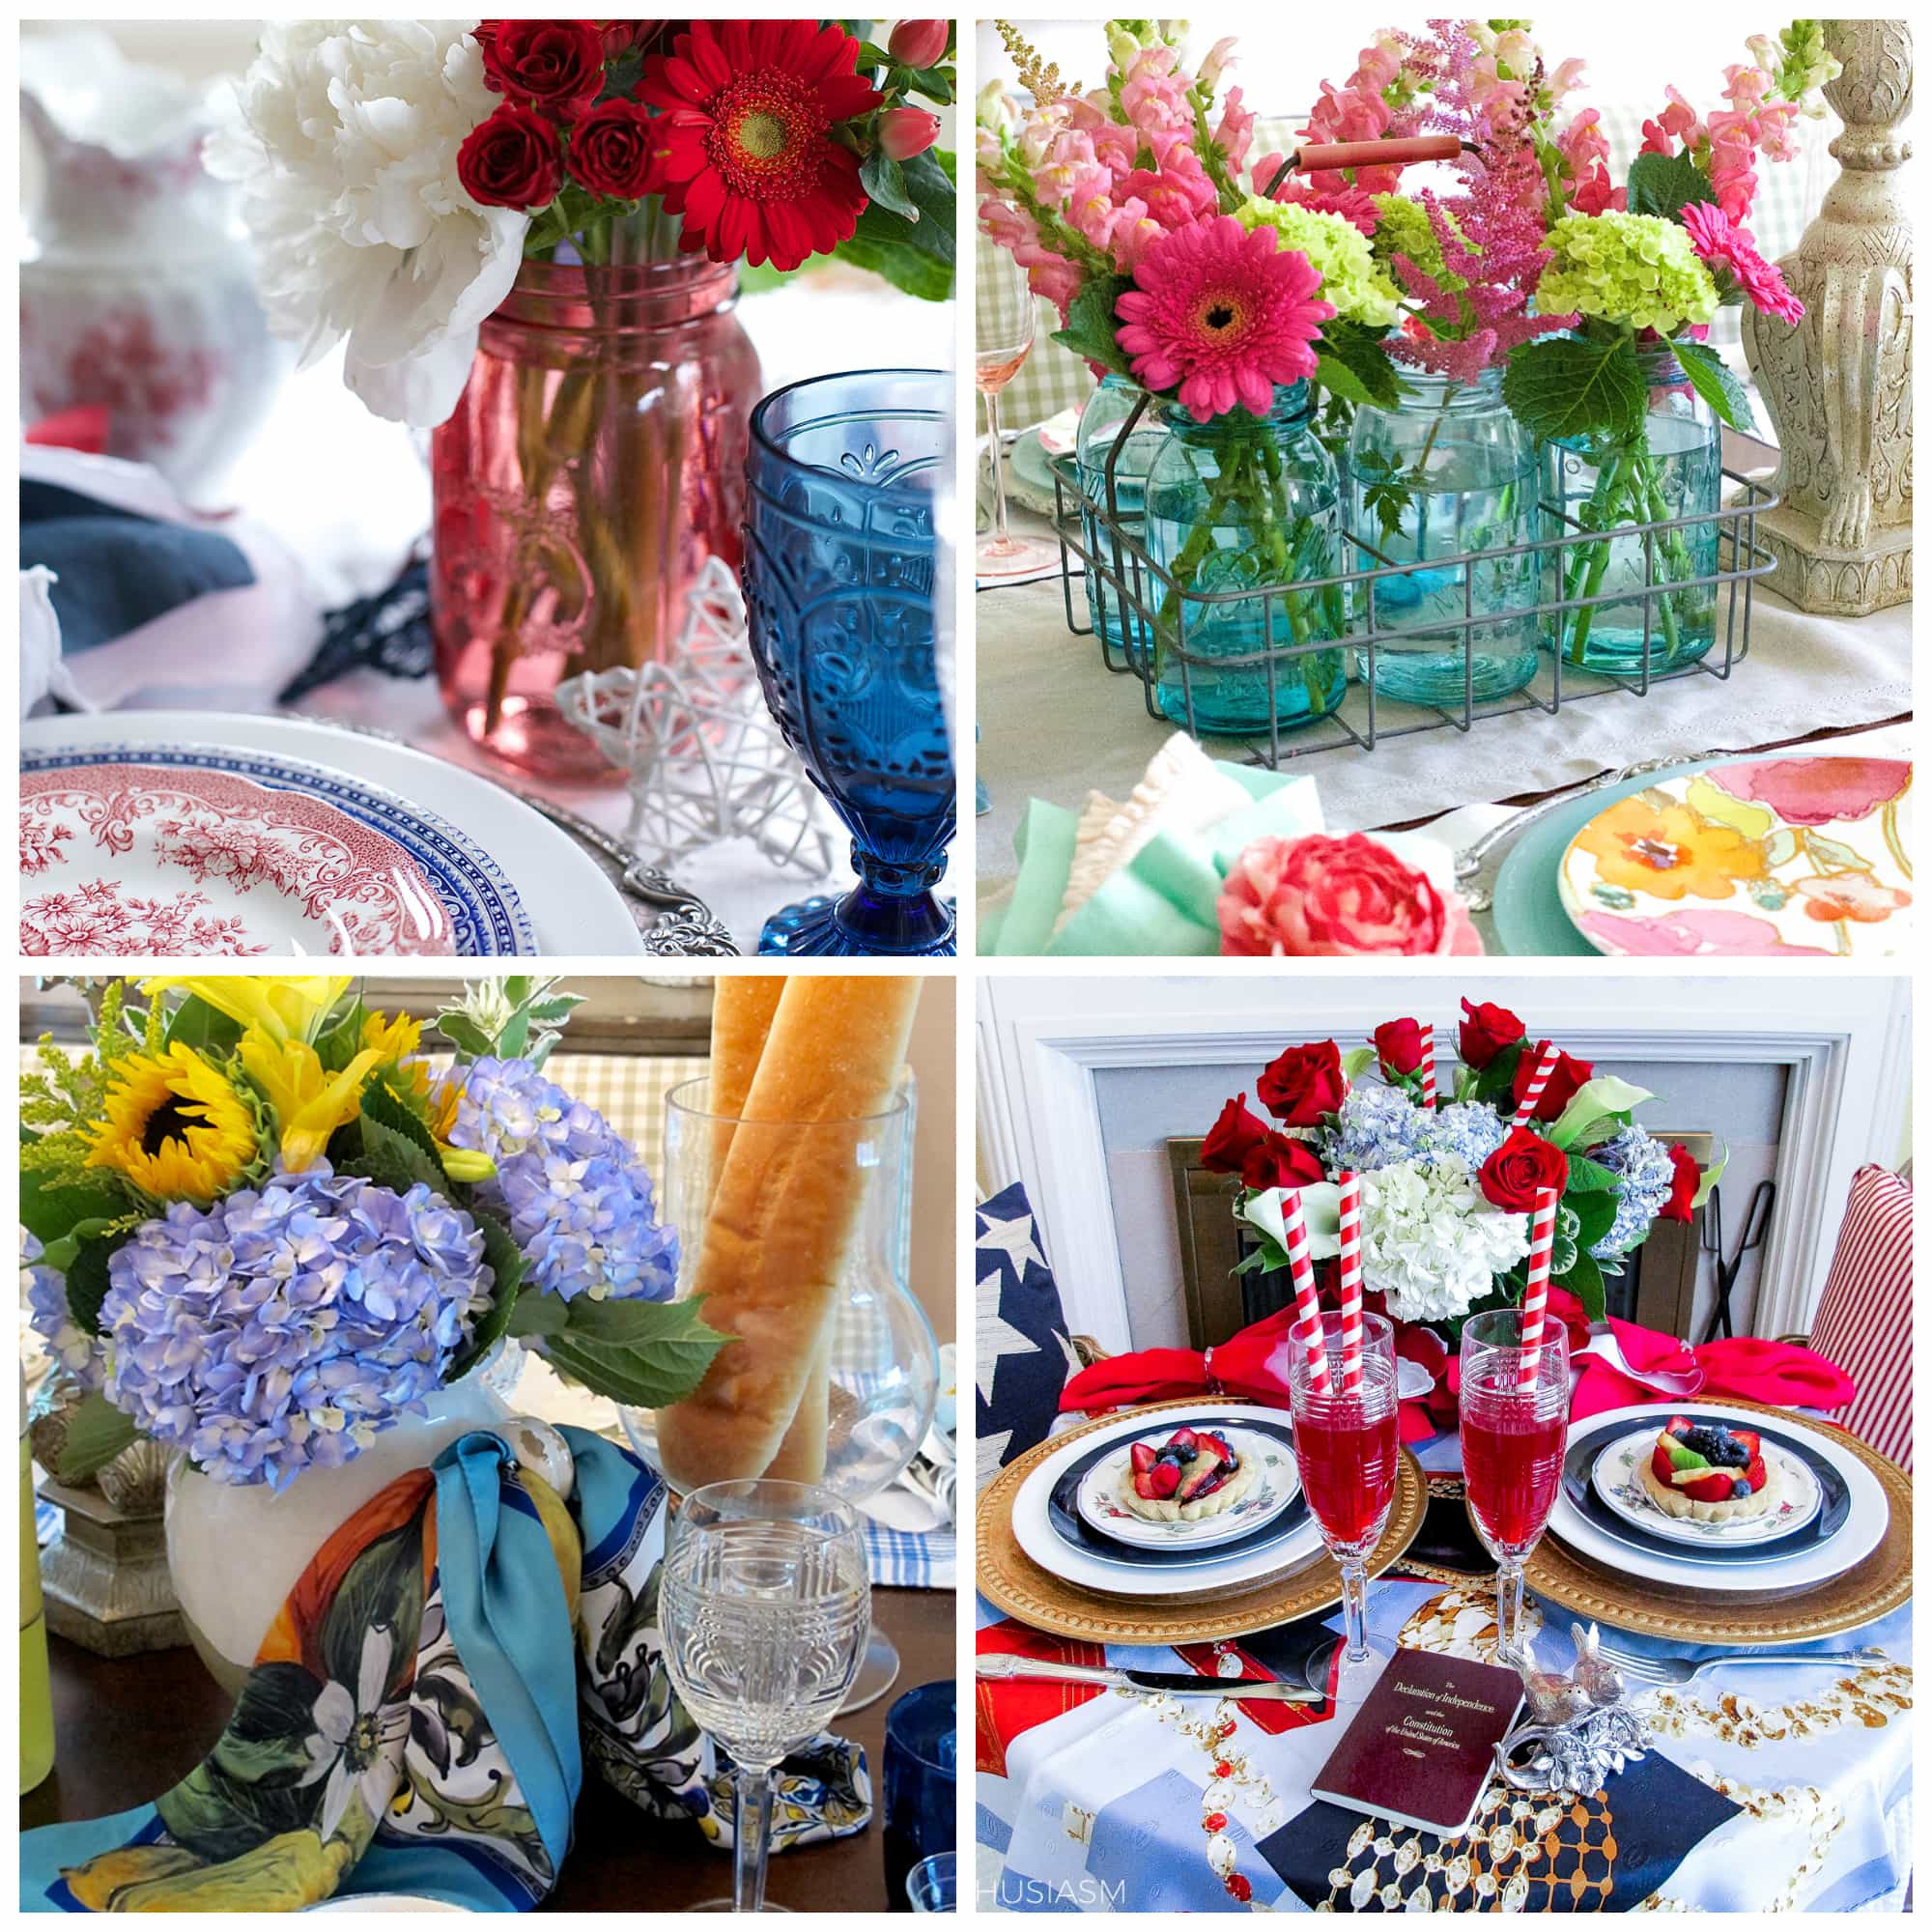 Summer Party Decorating Ideas
 Summer Party Decorations 6 Colorful Tablescape Ideas